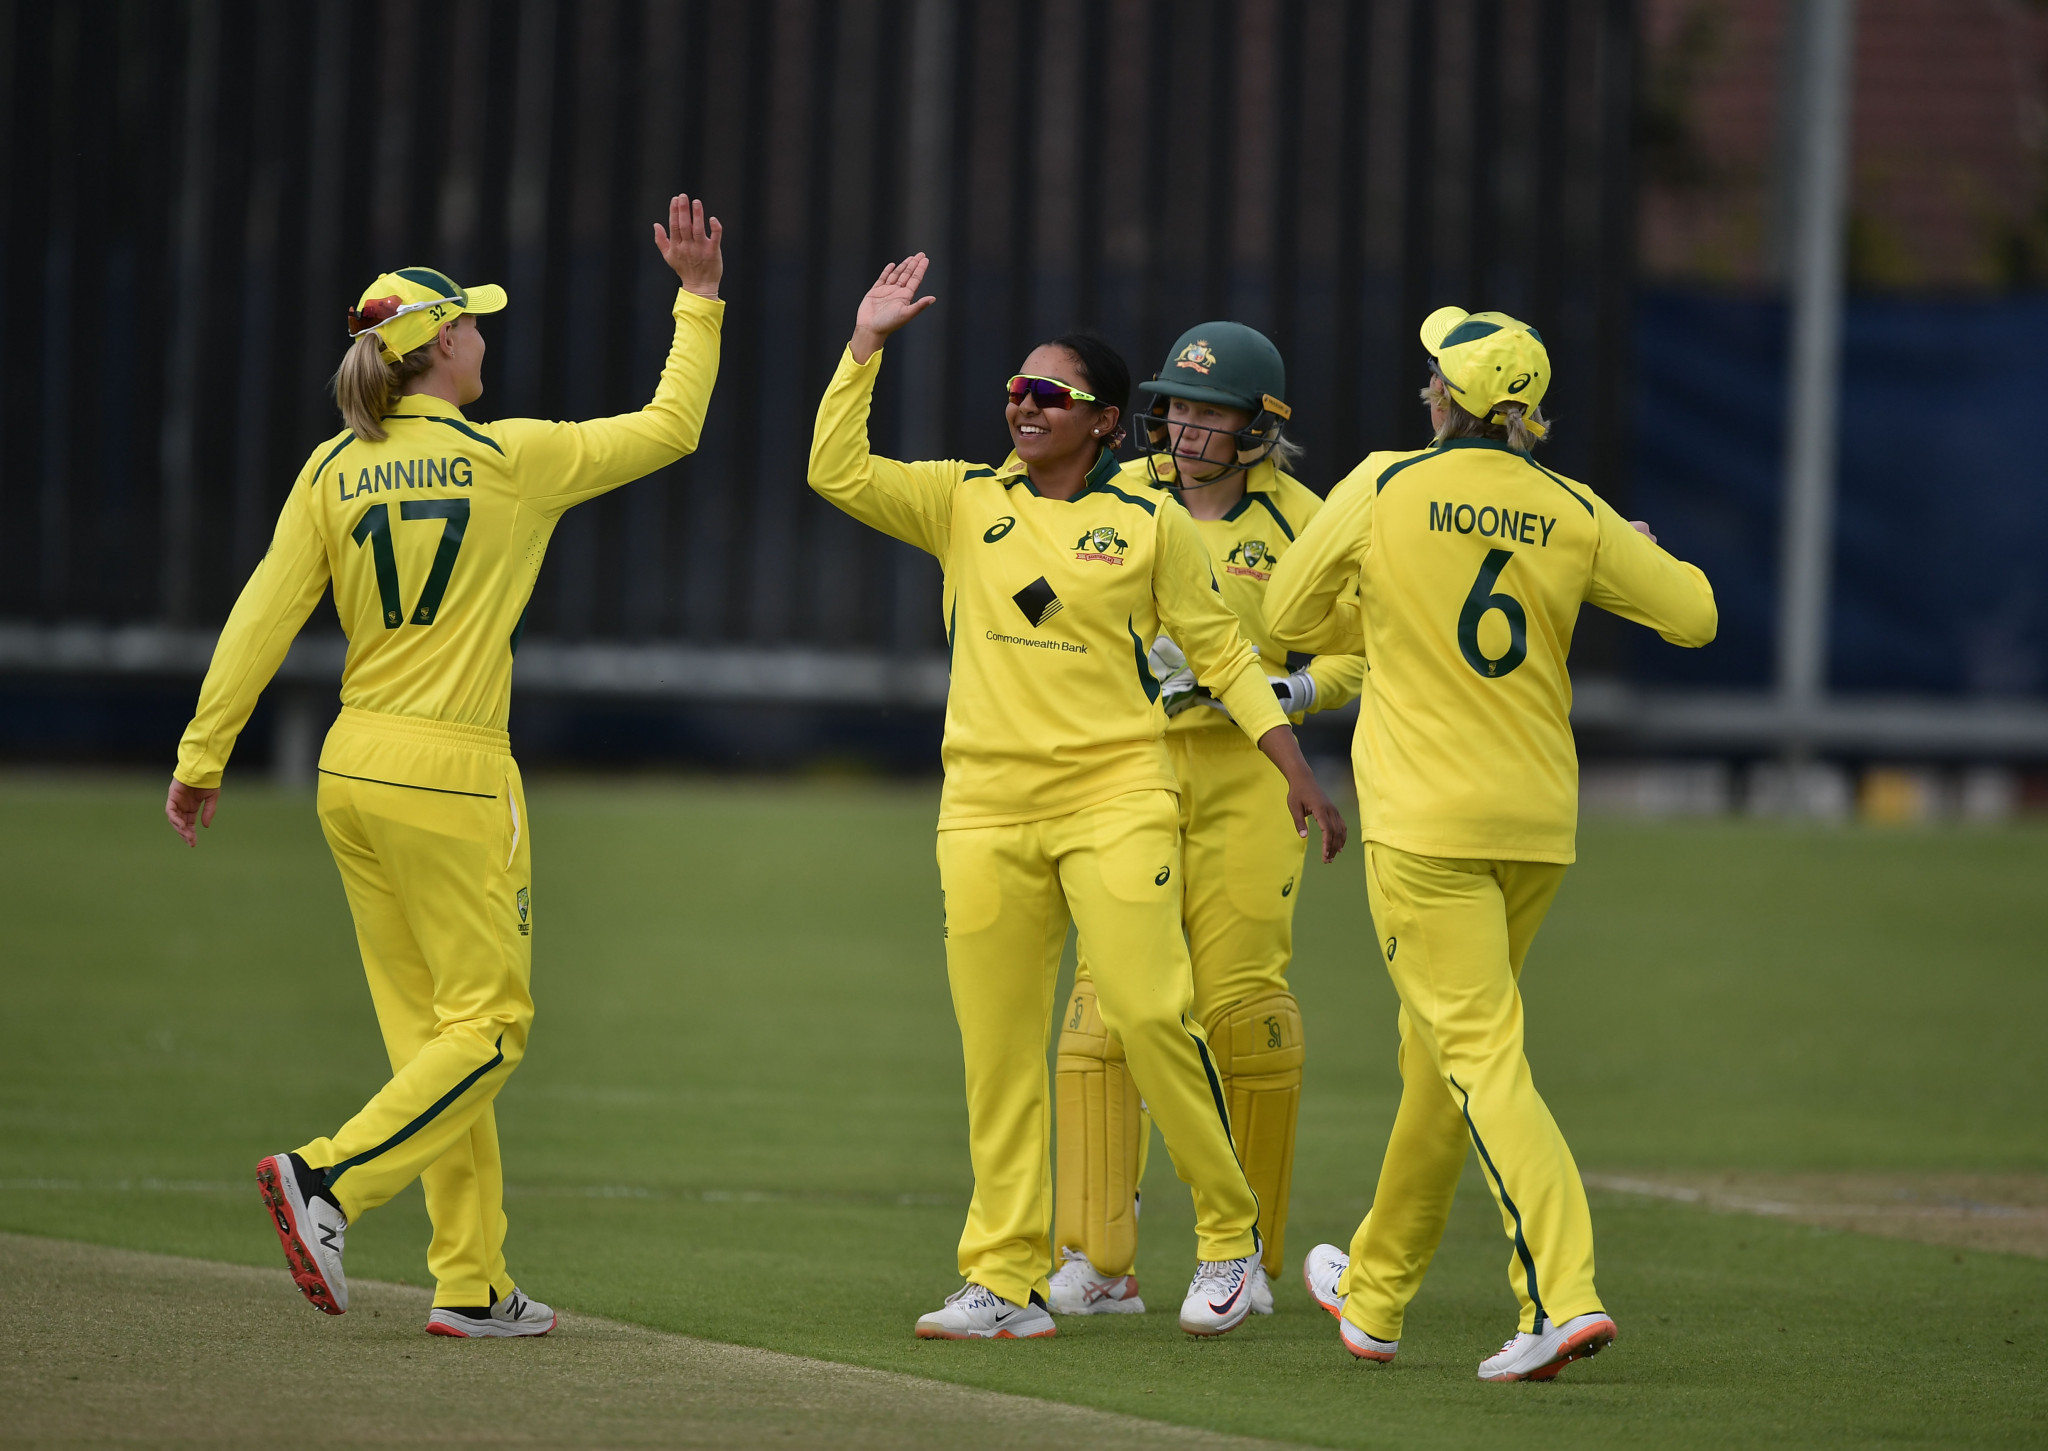 Australia will be among the favourites for T20 cricket gold at Birmingham 2022 ©Getty Images